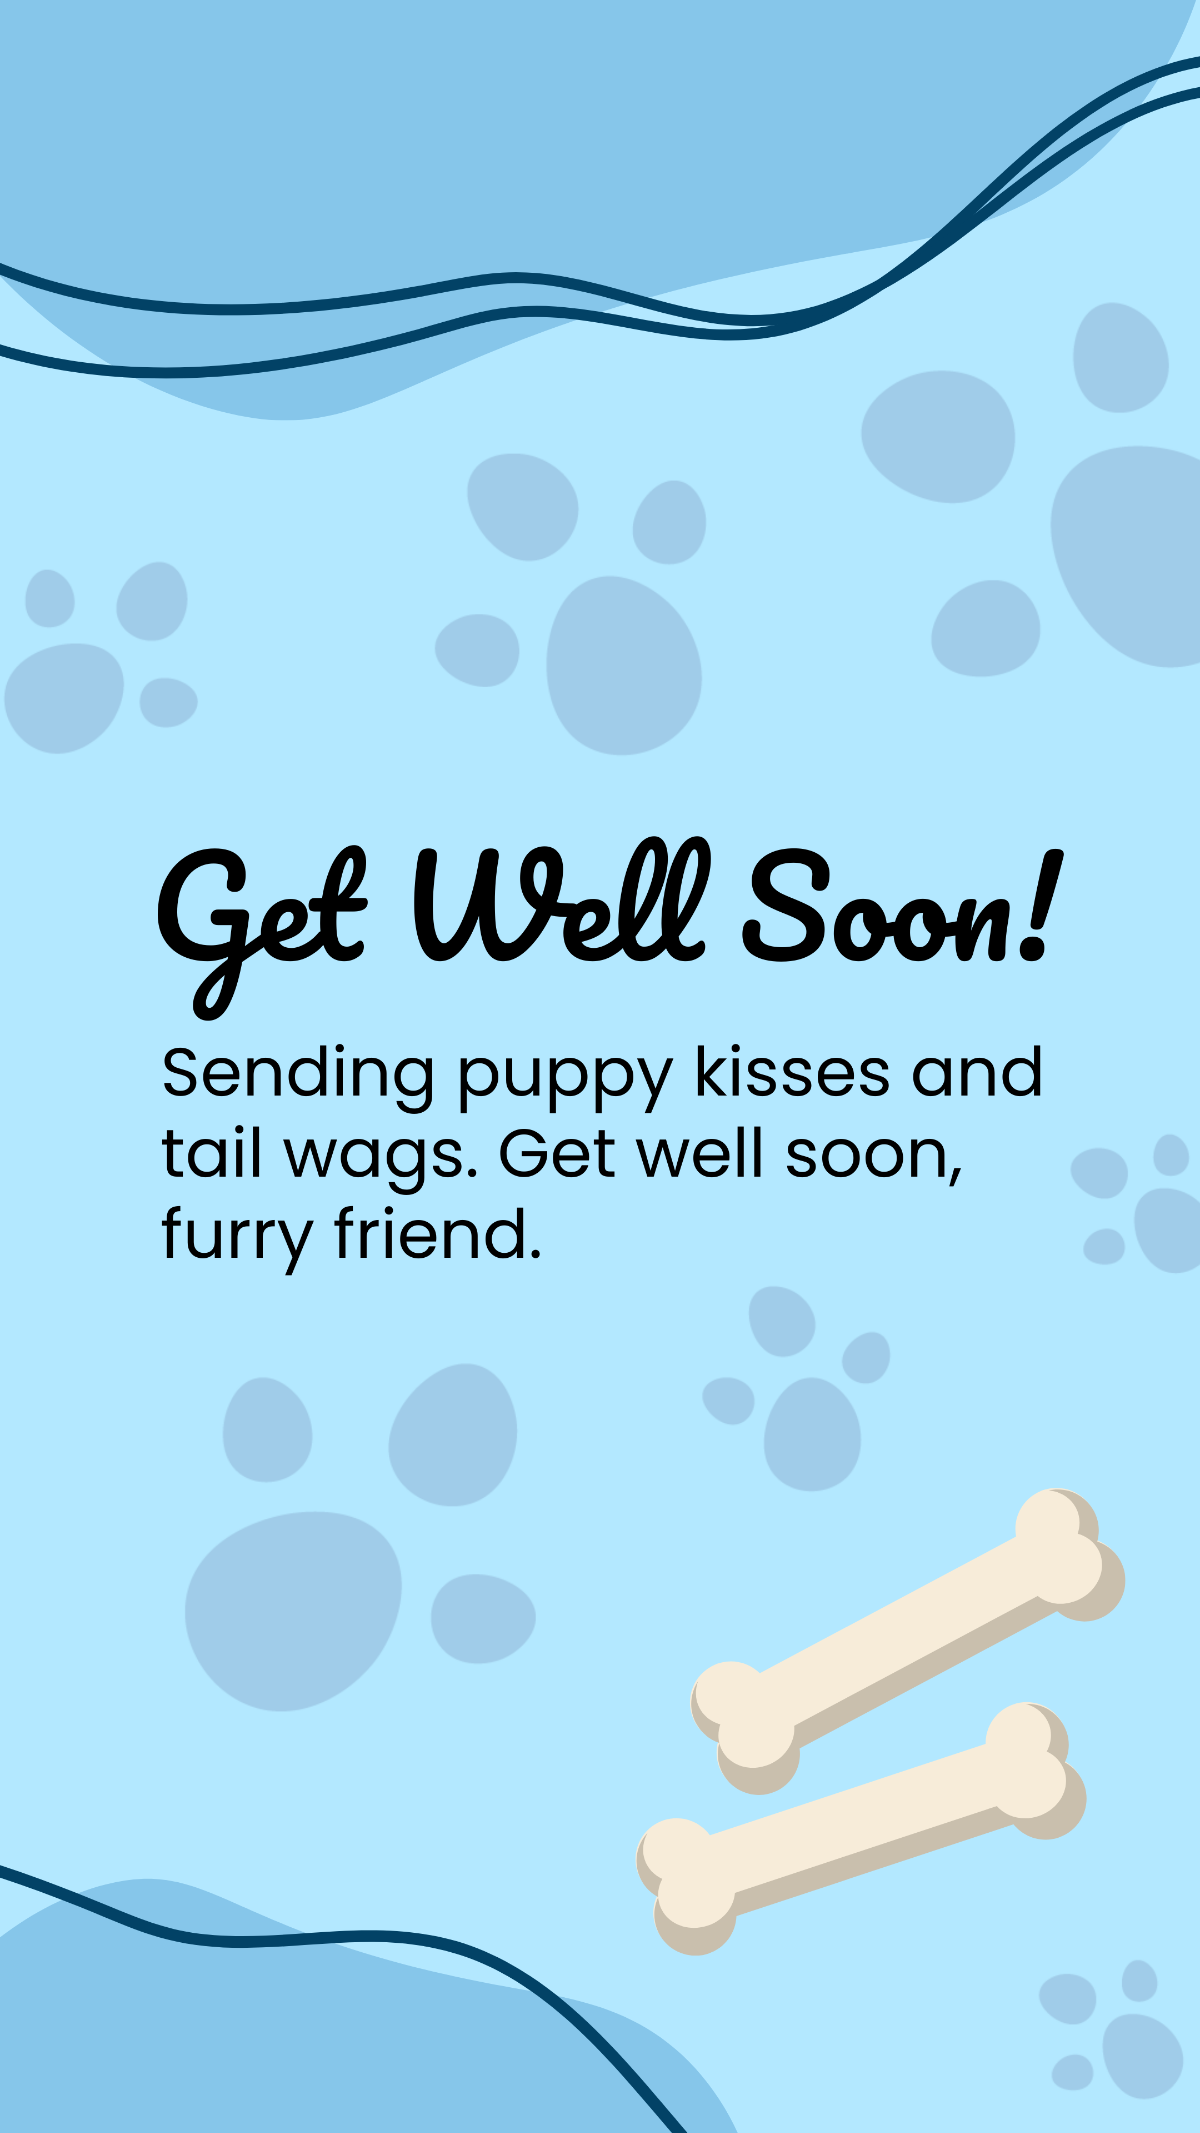 Get Well Soon Puppy Card Template